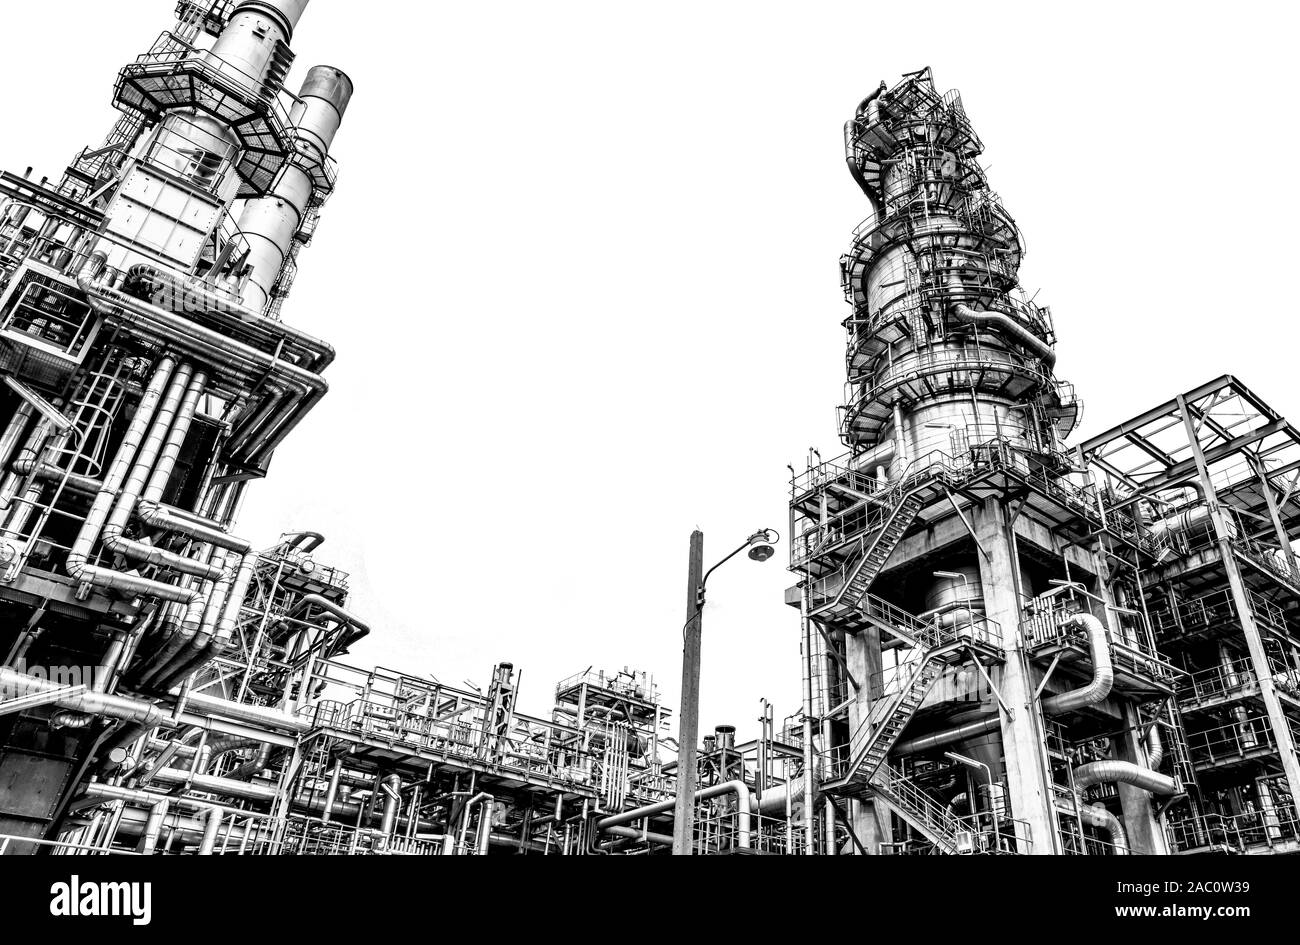 Oil and gas industry,refinery factory,petrochemical plant area at white background. Stock Photo